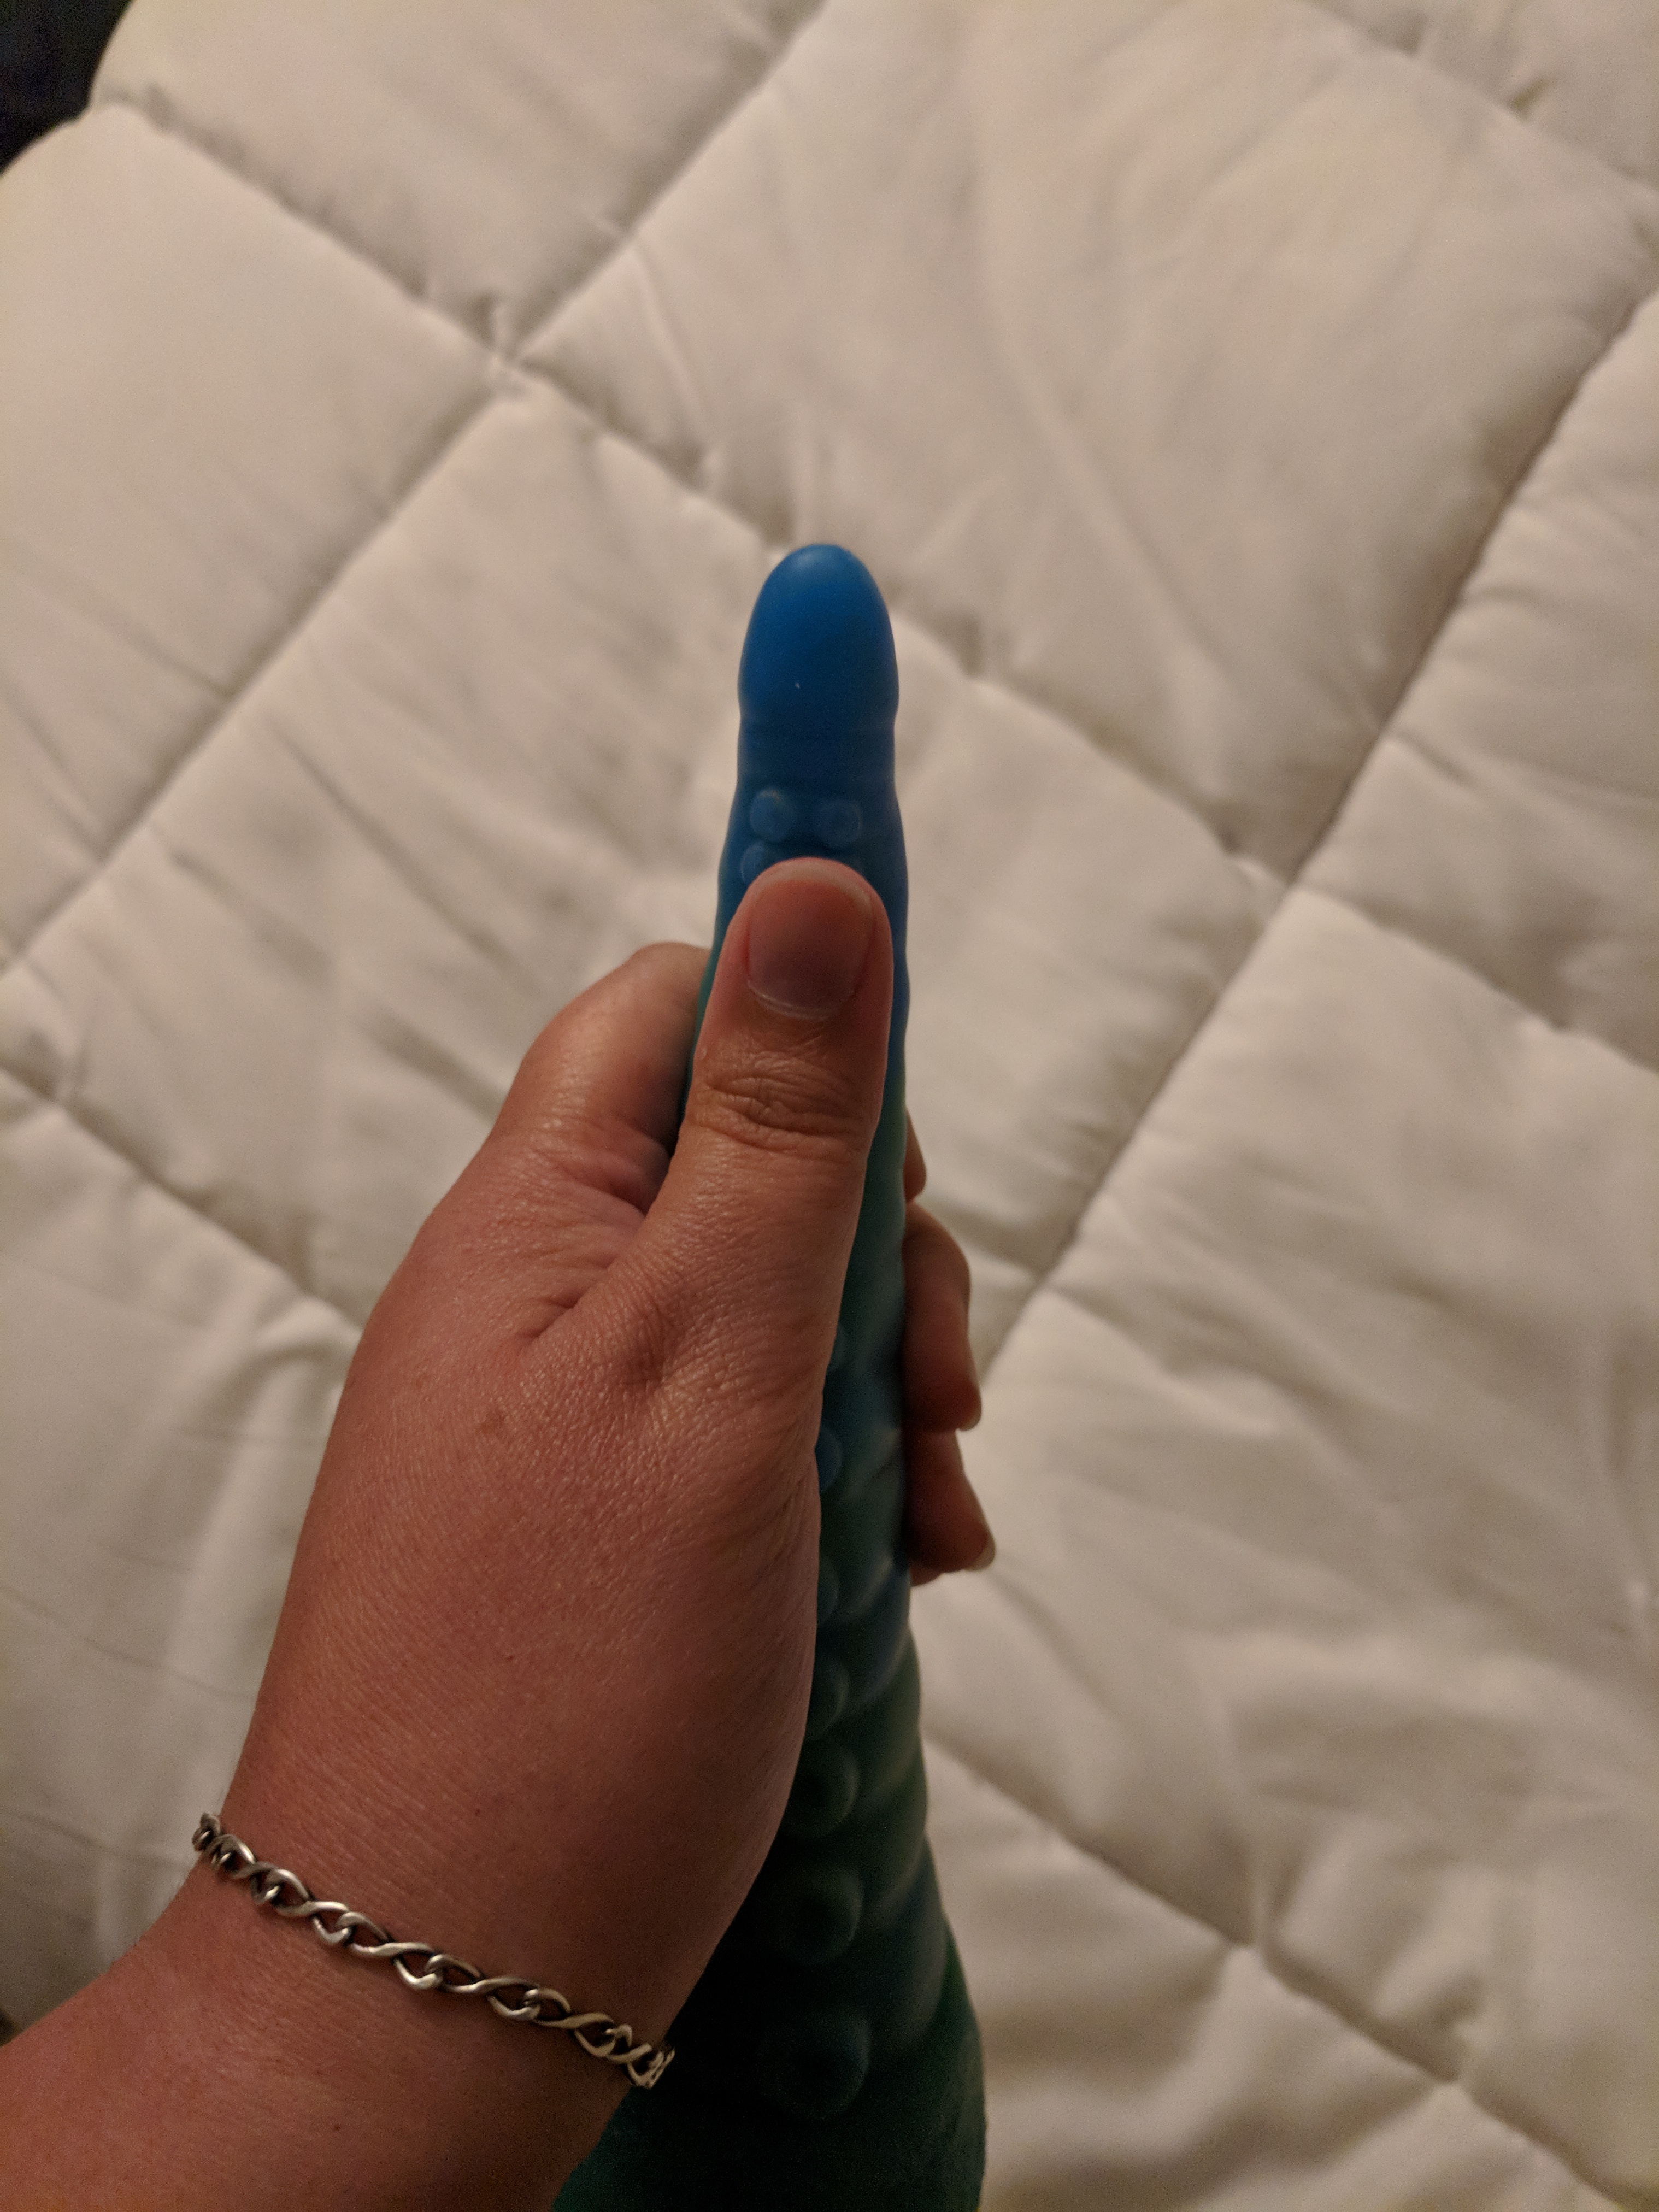 Tentacle dildo in hand, with thumb against tip, showing the tip as wide as a thumb